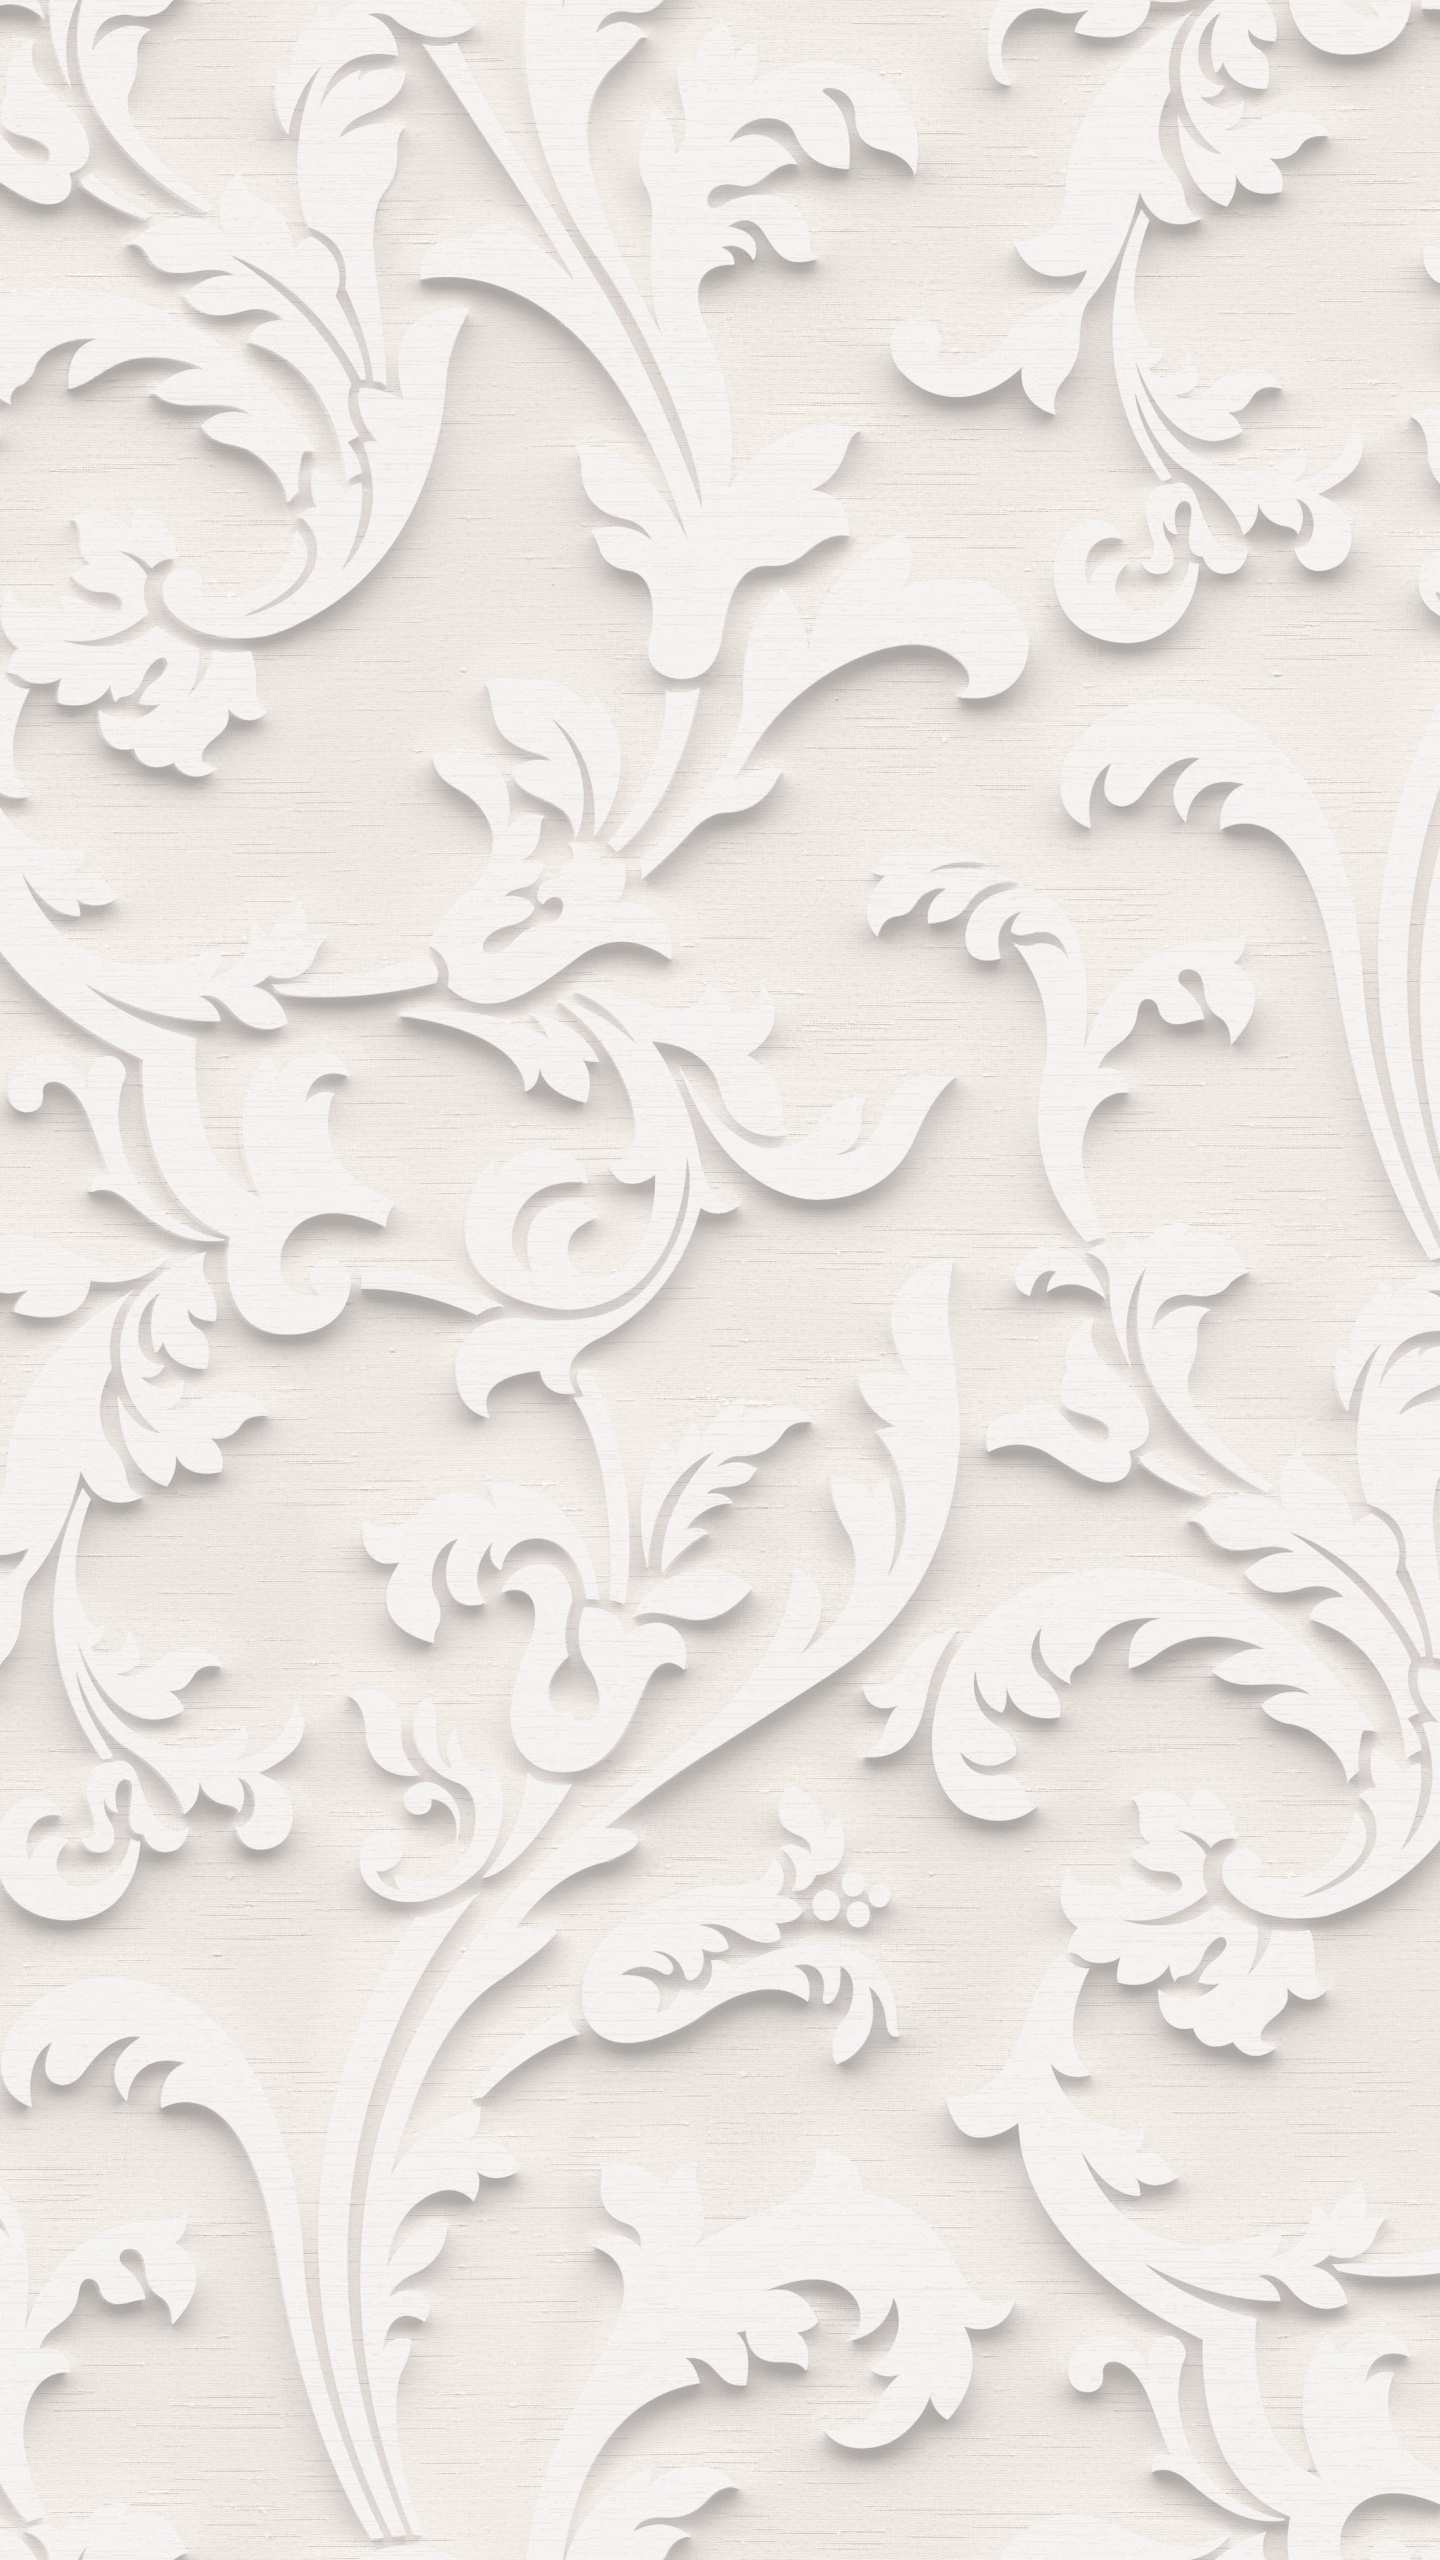 White and Gray Floral Textile. Wallpaper in 1440x2560 Resolution